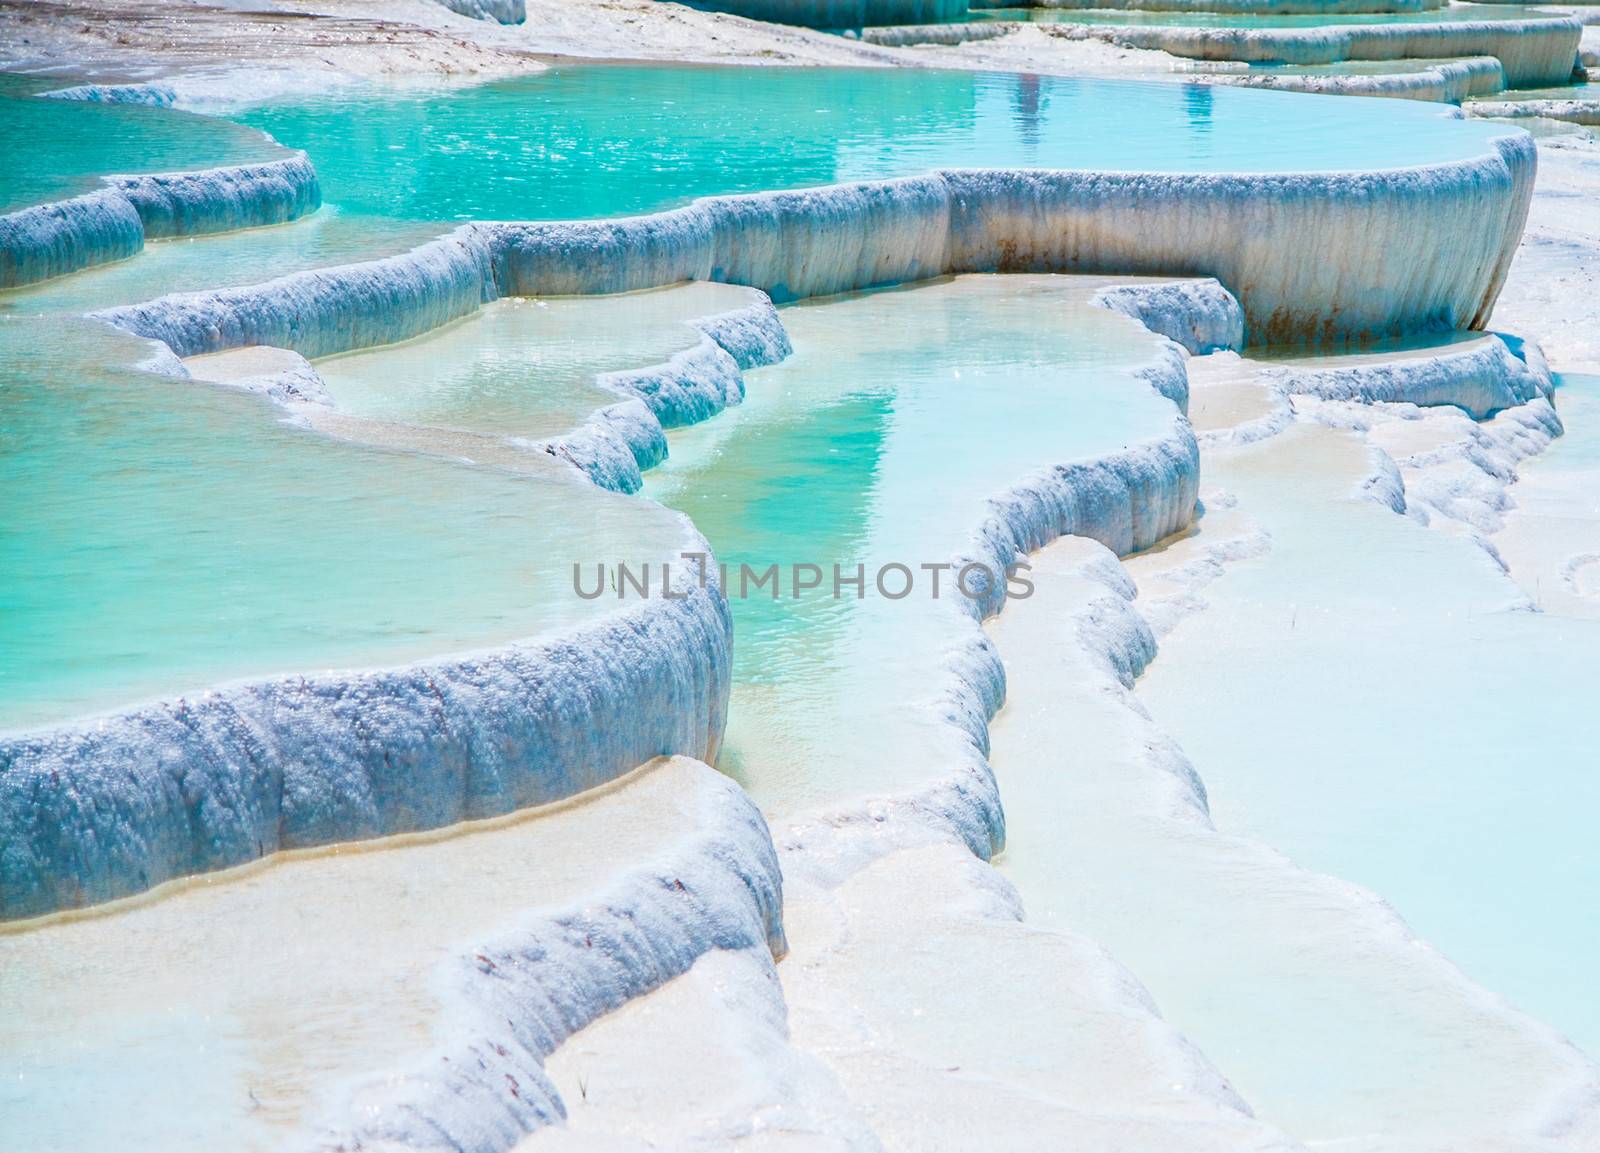 Famous blue travertine pools and terraces in Pamukkale Turkey